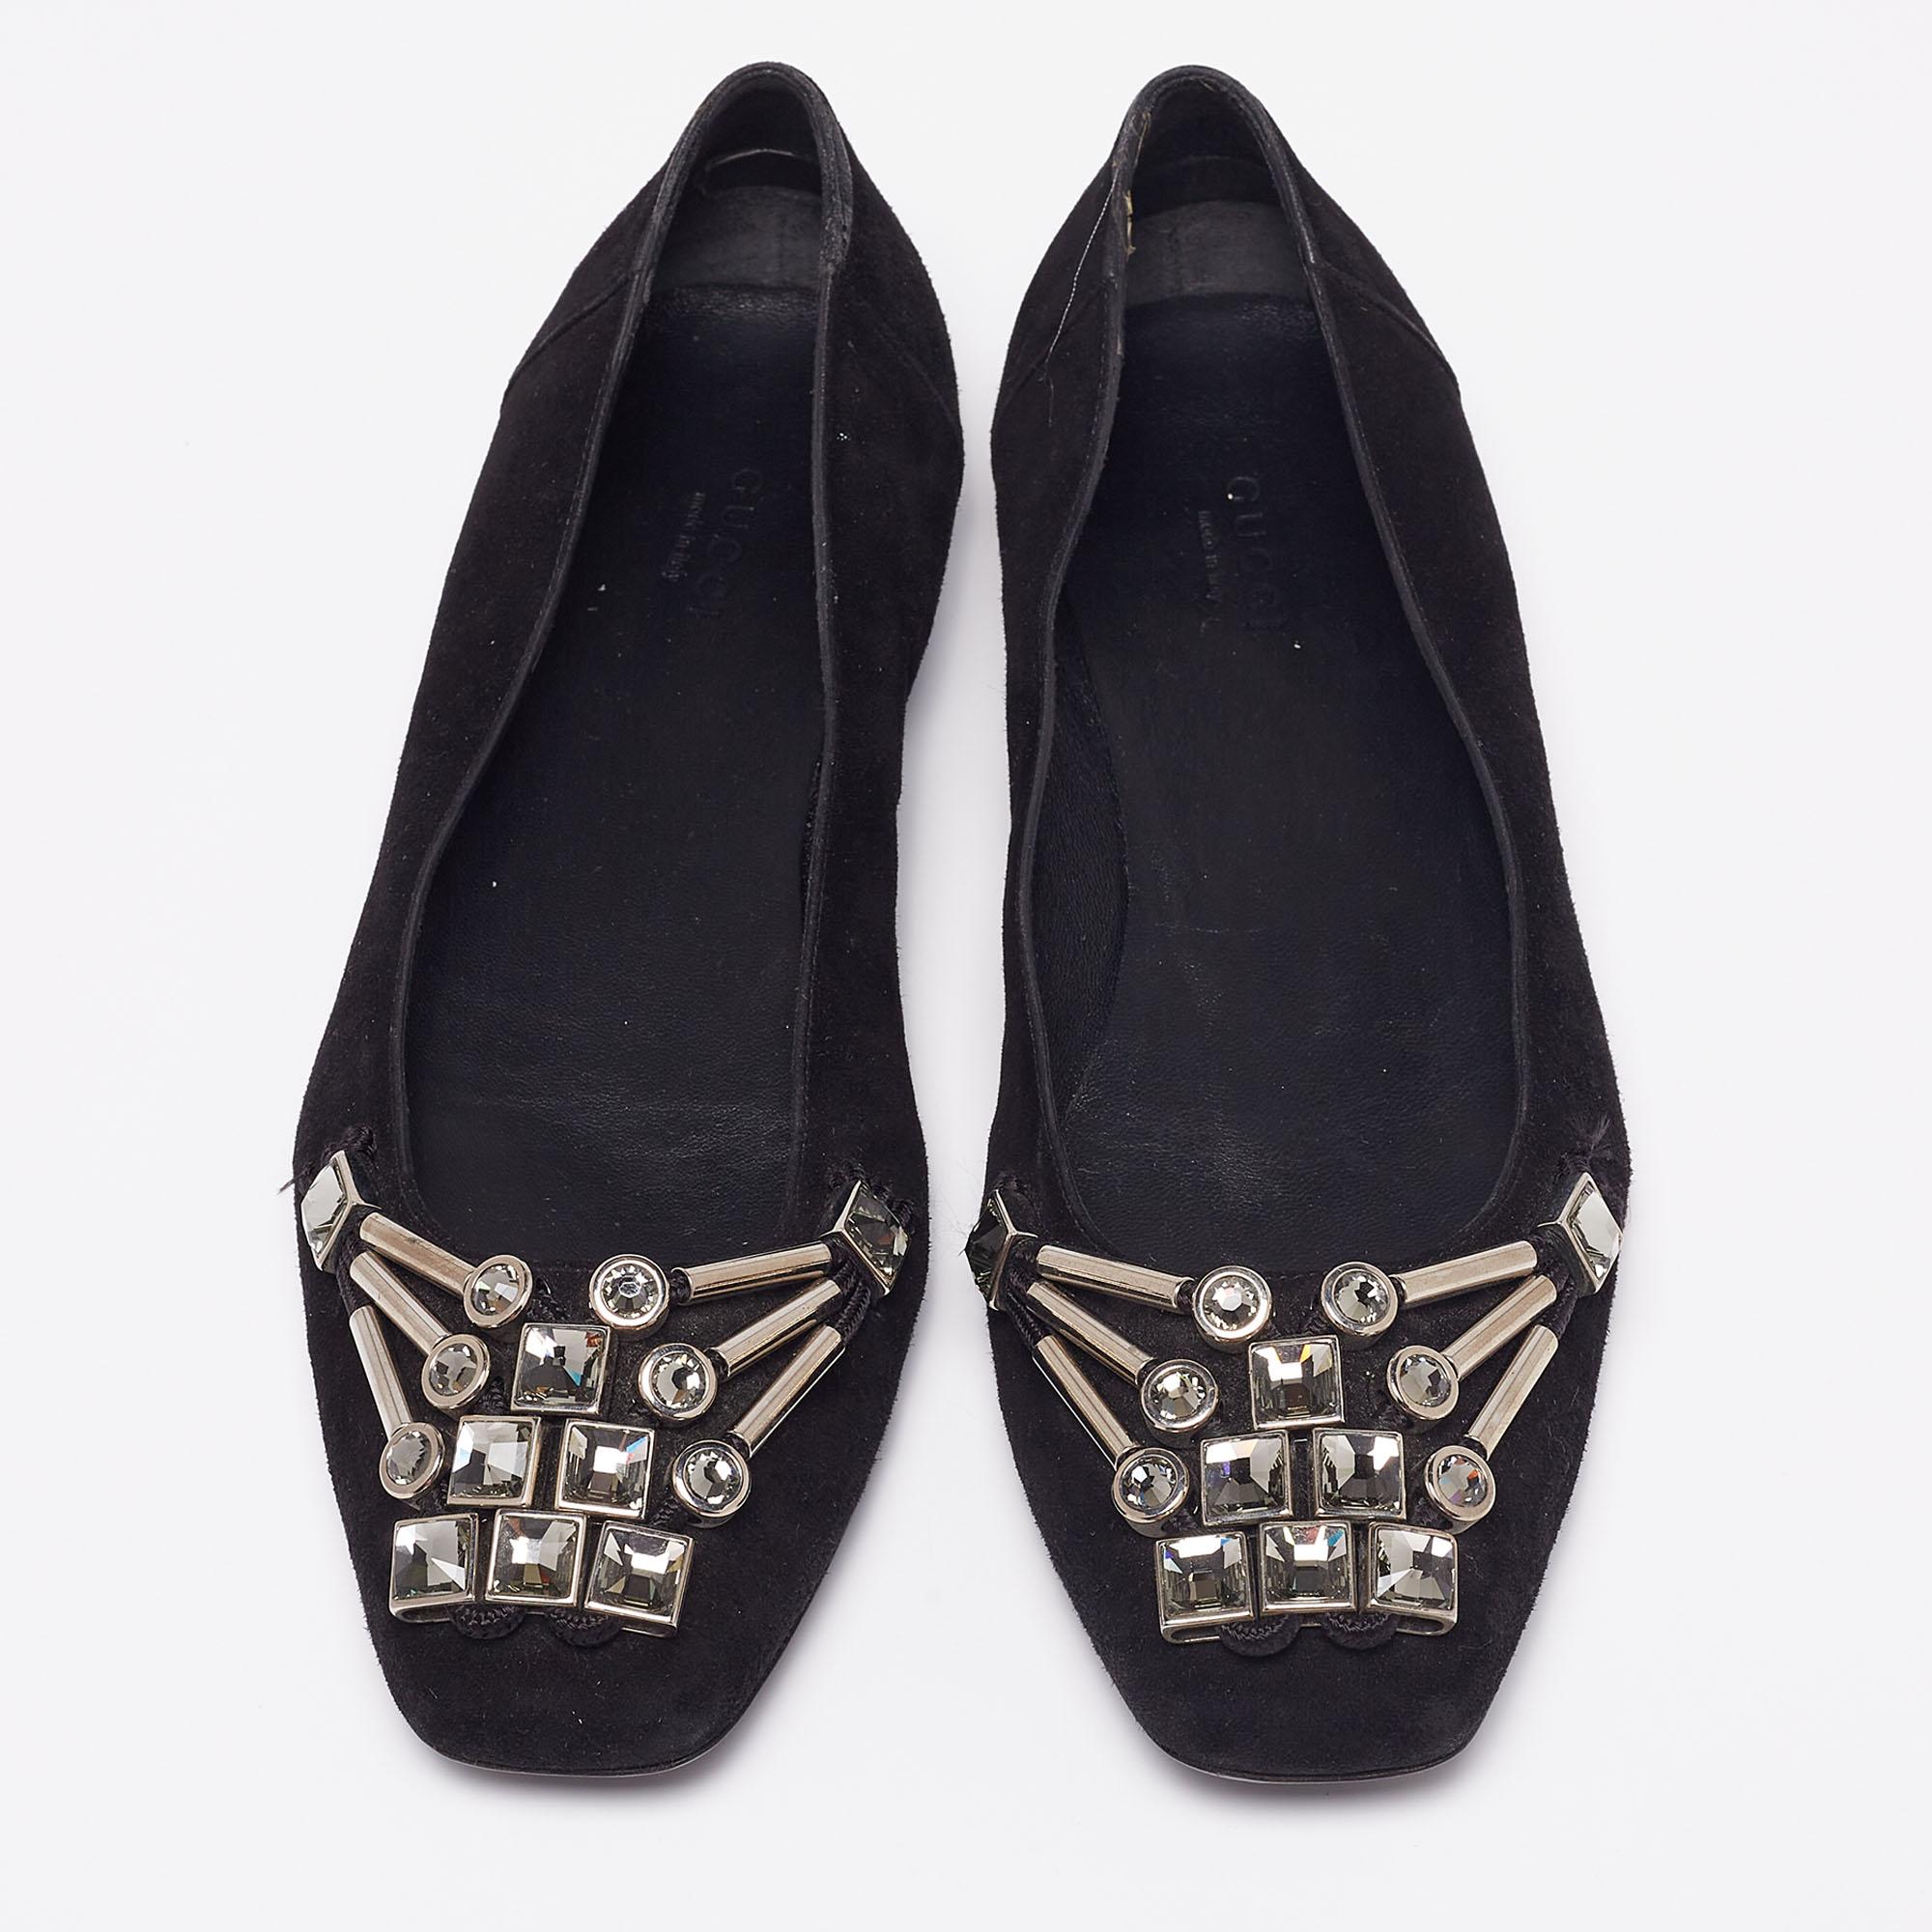 Make your feet feel chic and dainty in these Gucci ballet flats. Designed exquisitely using suede, the lovely black flats flaunt crystal embellishments on the front. Pair them with flowy dresses and statement accessories for an elegant look.

